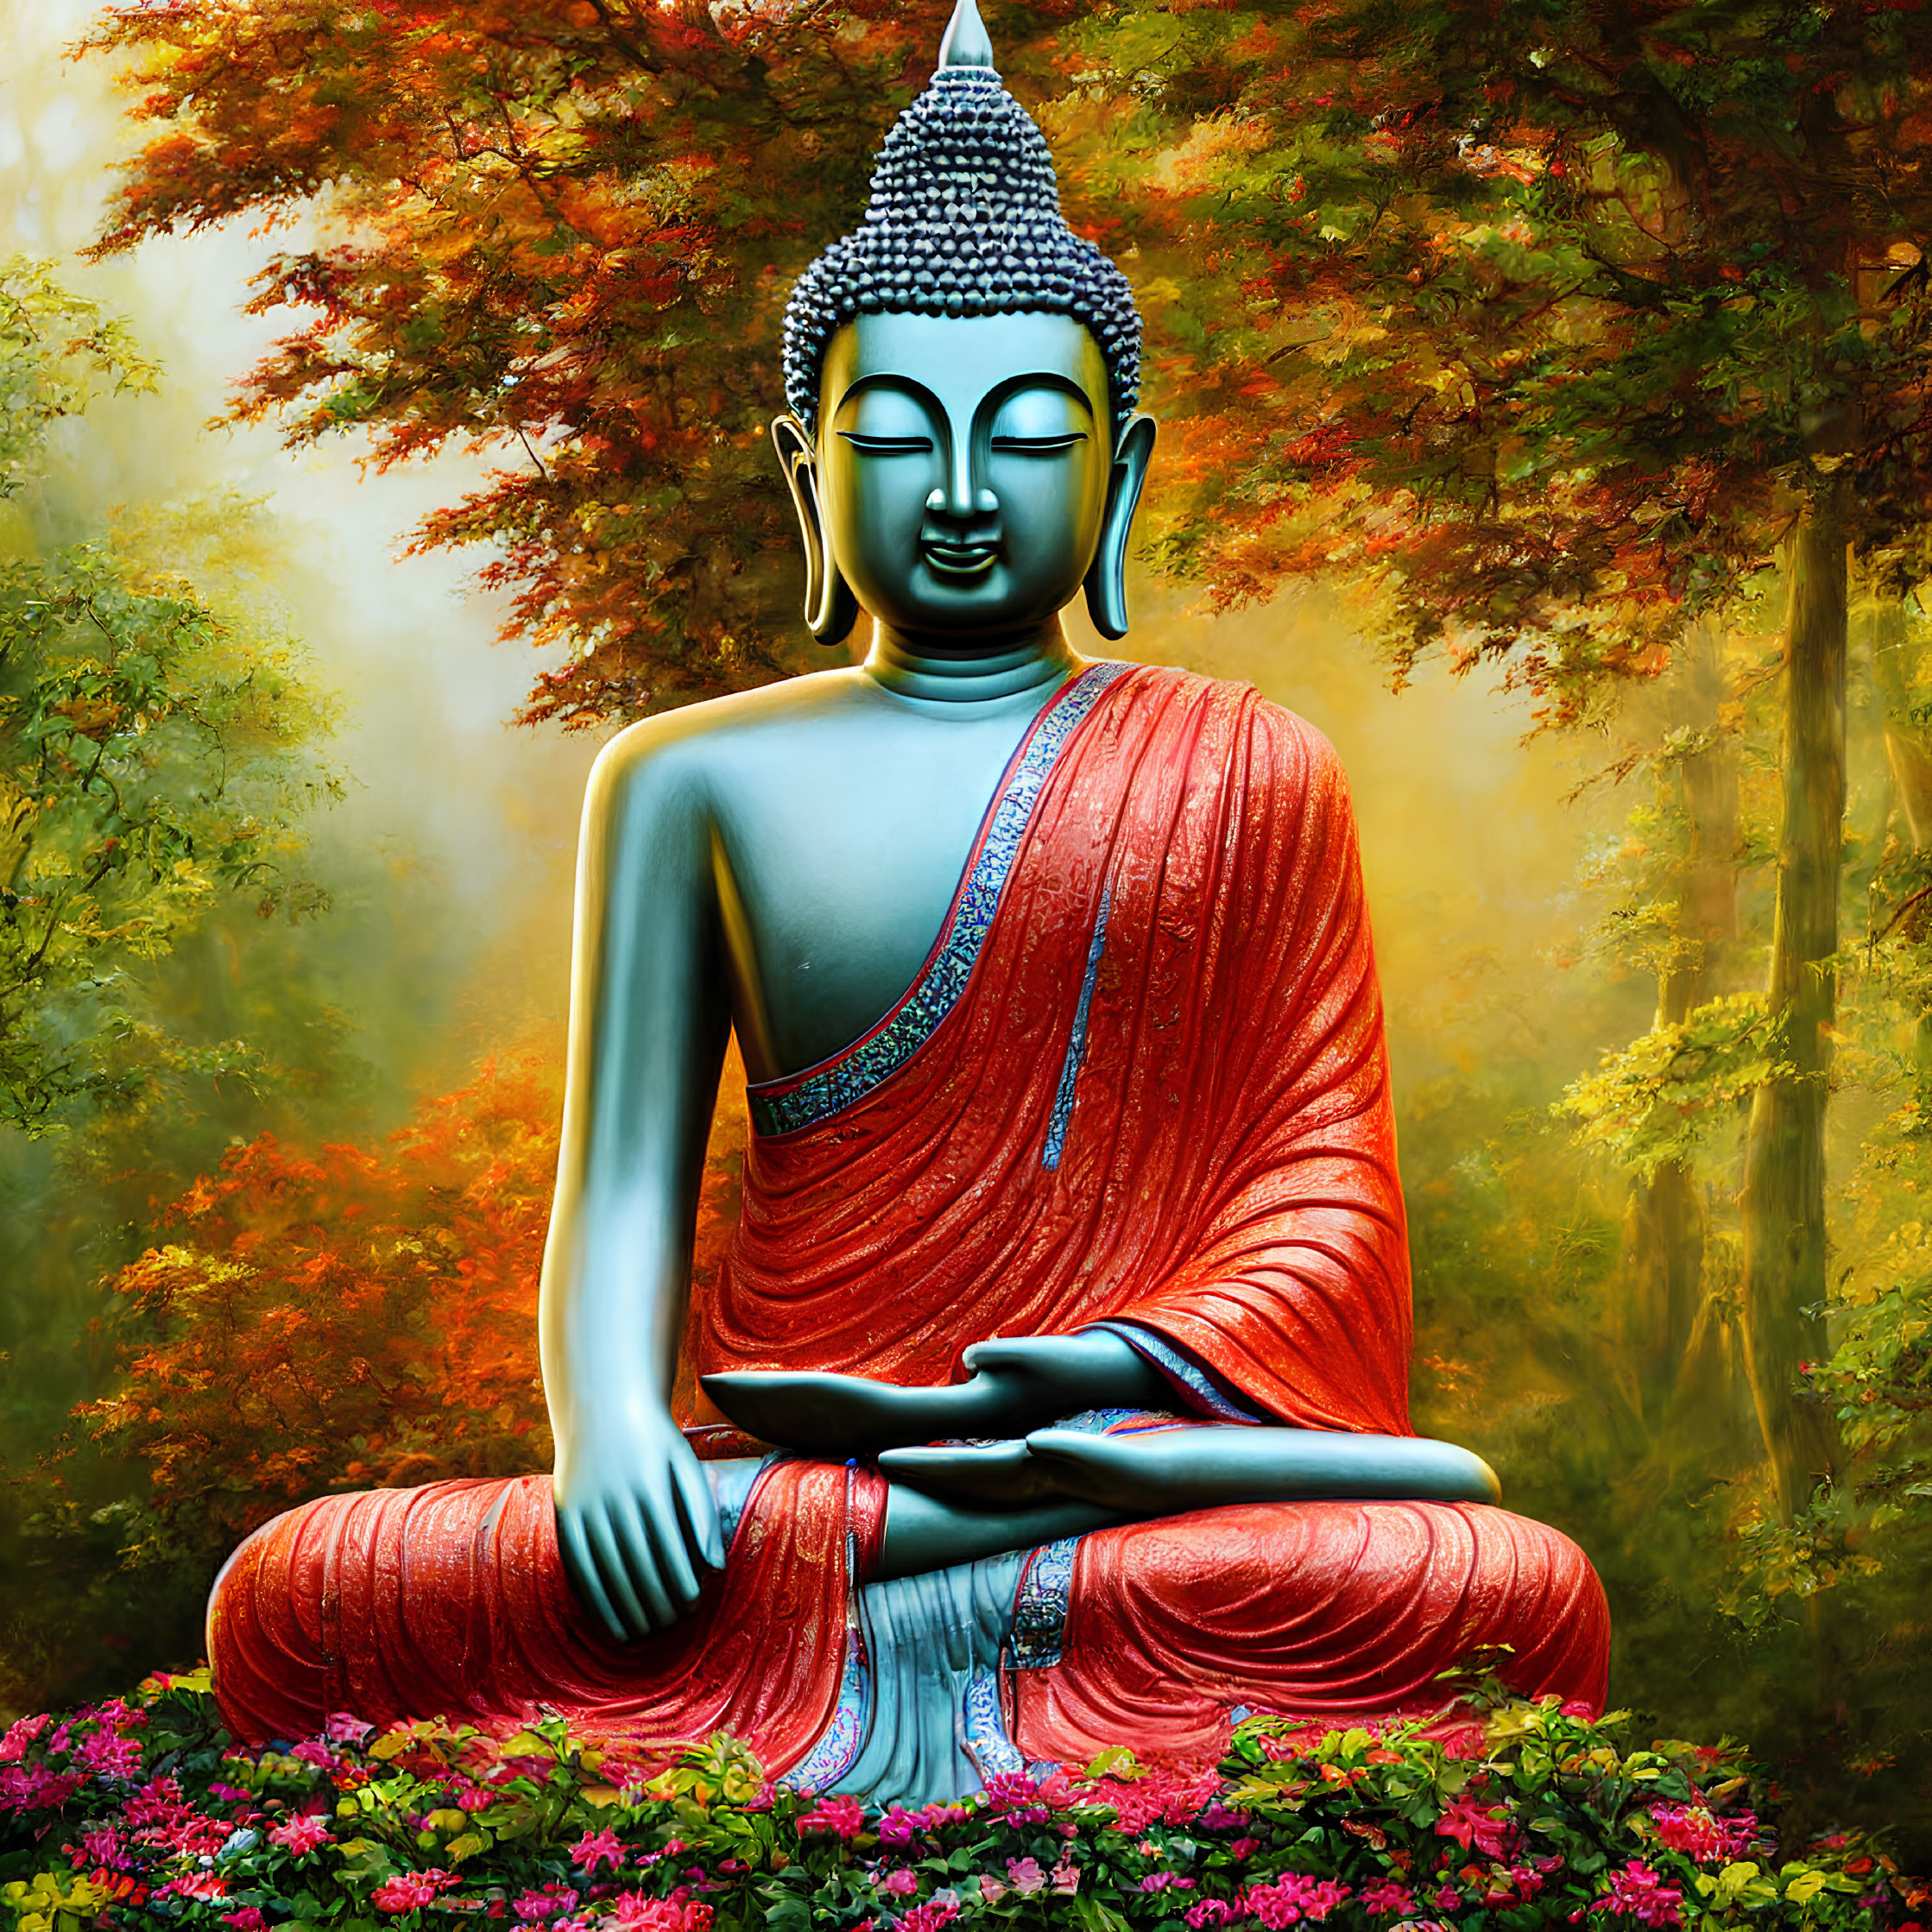 Colorful Buddha statue meditating in autumn forest landscape